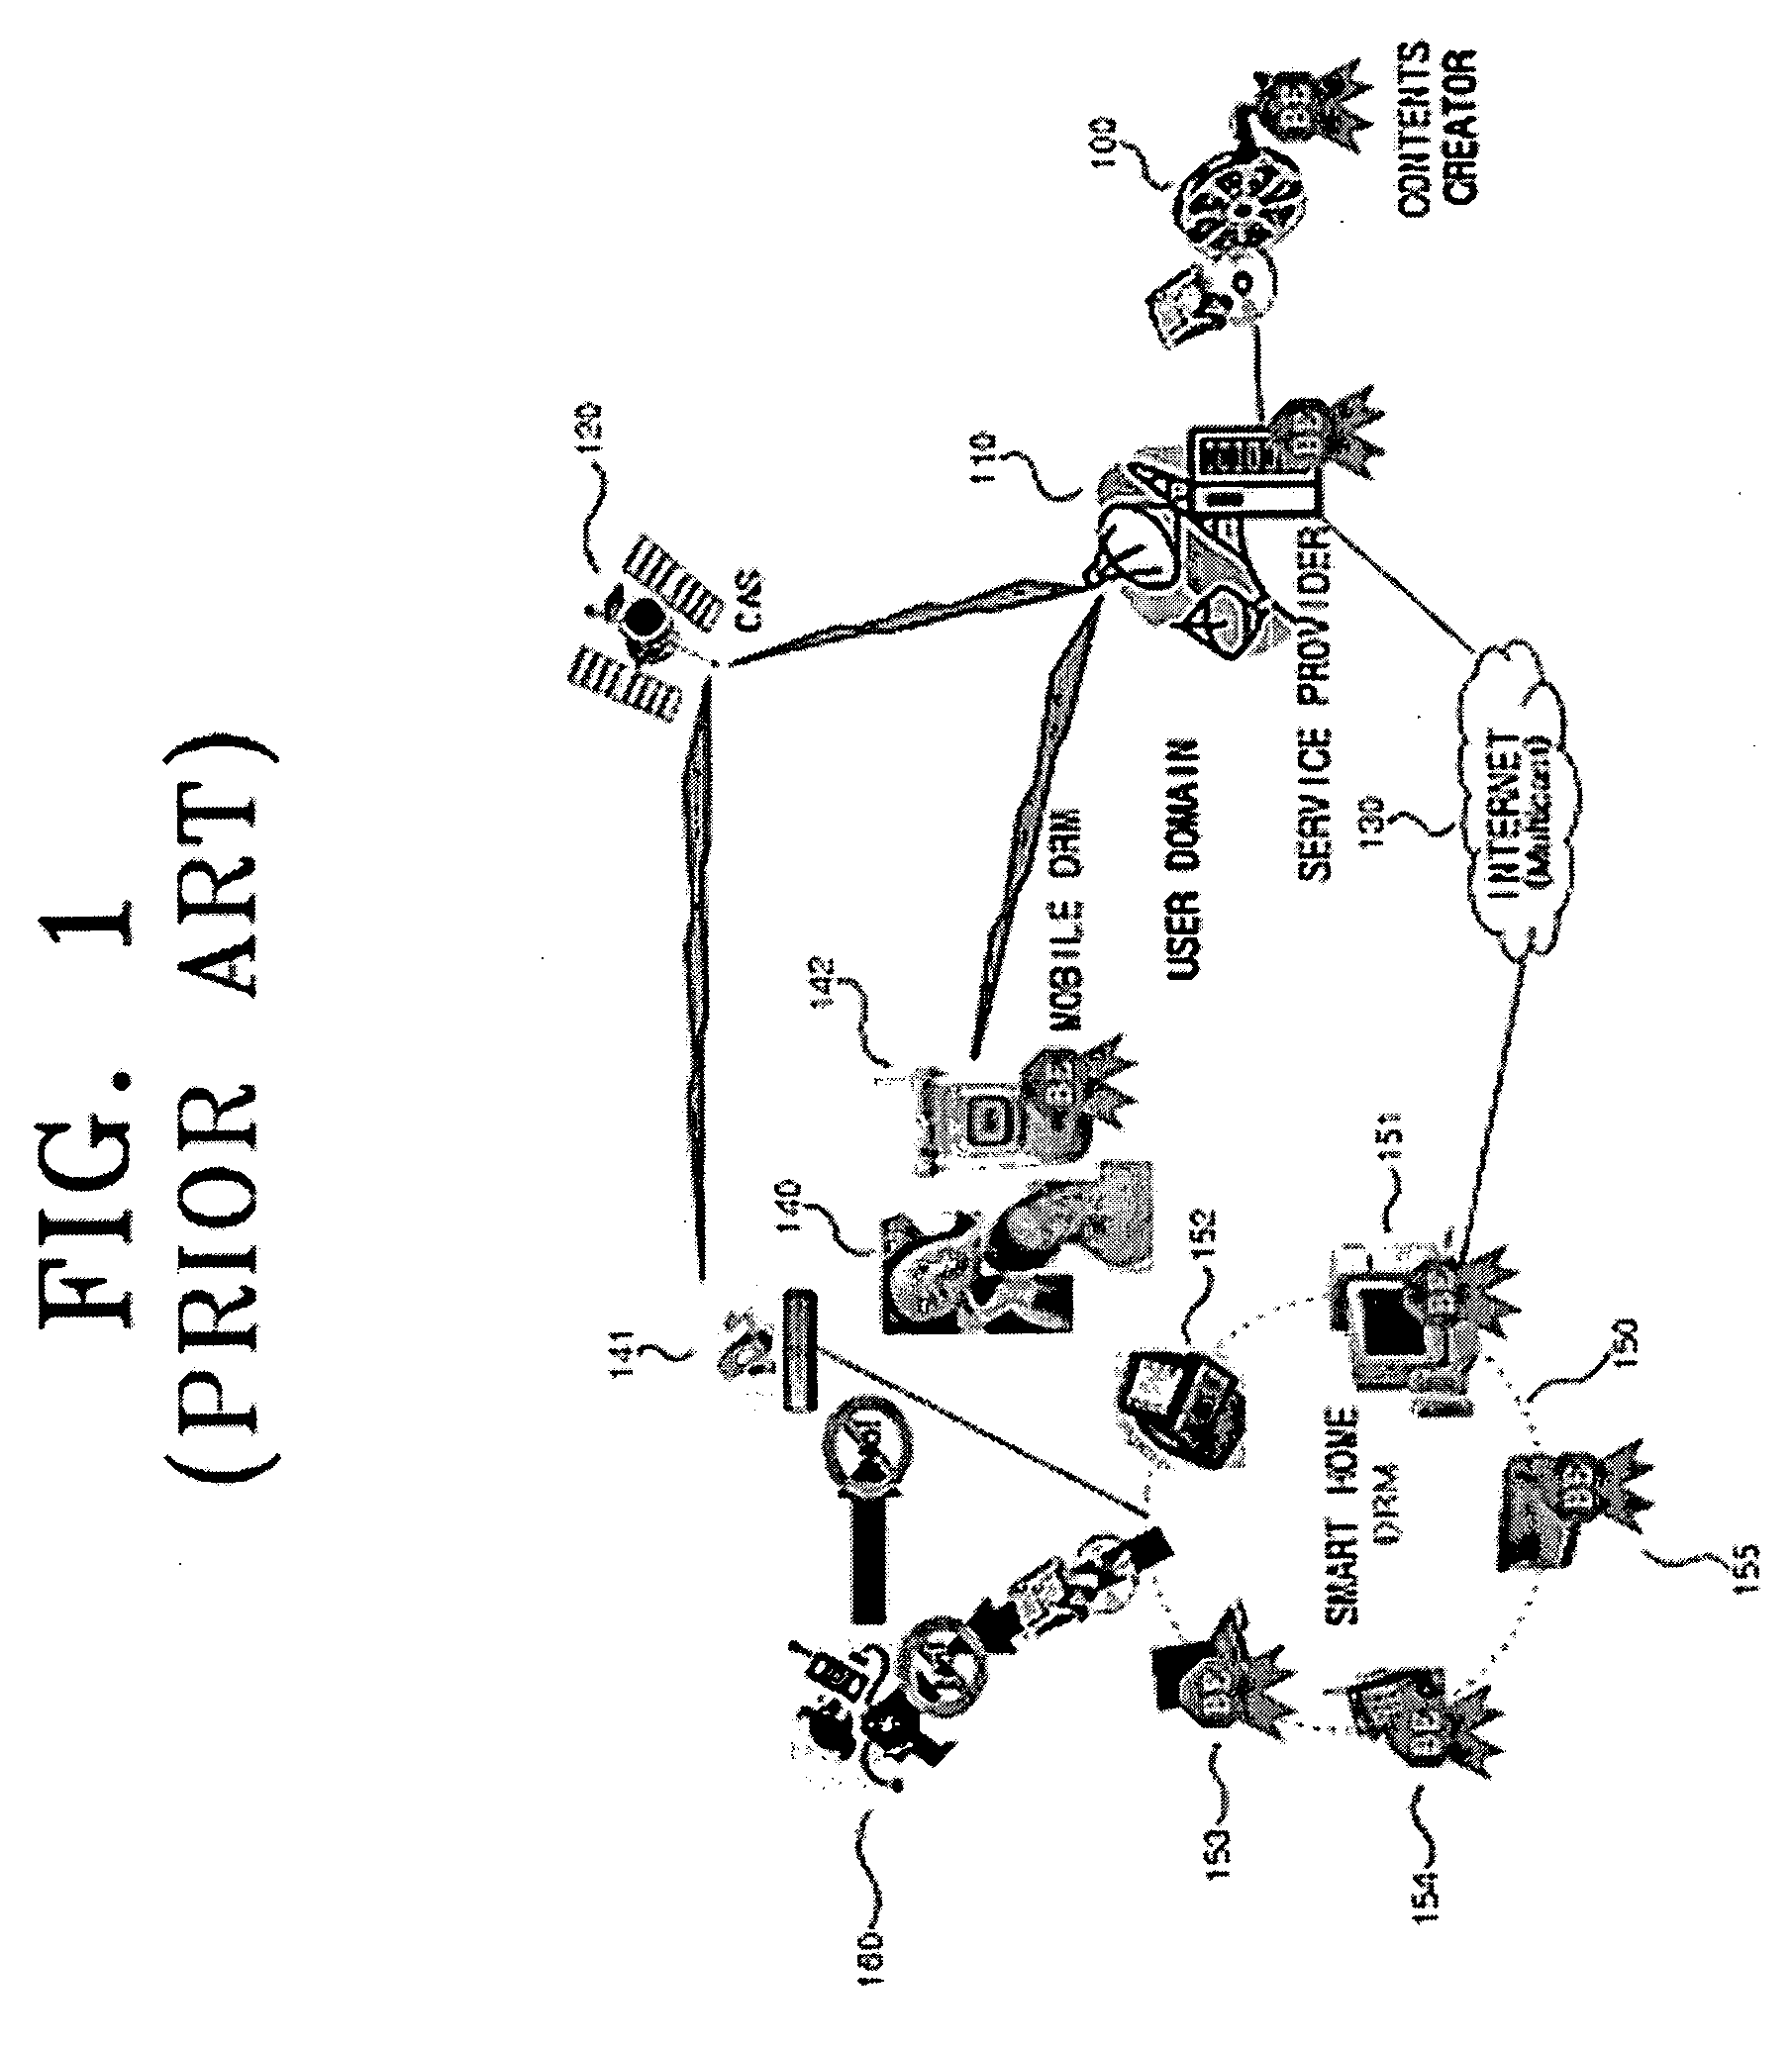 Apparatus and method for generating a key for broadcast encryption